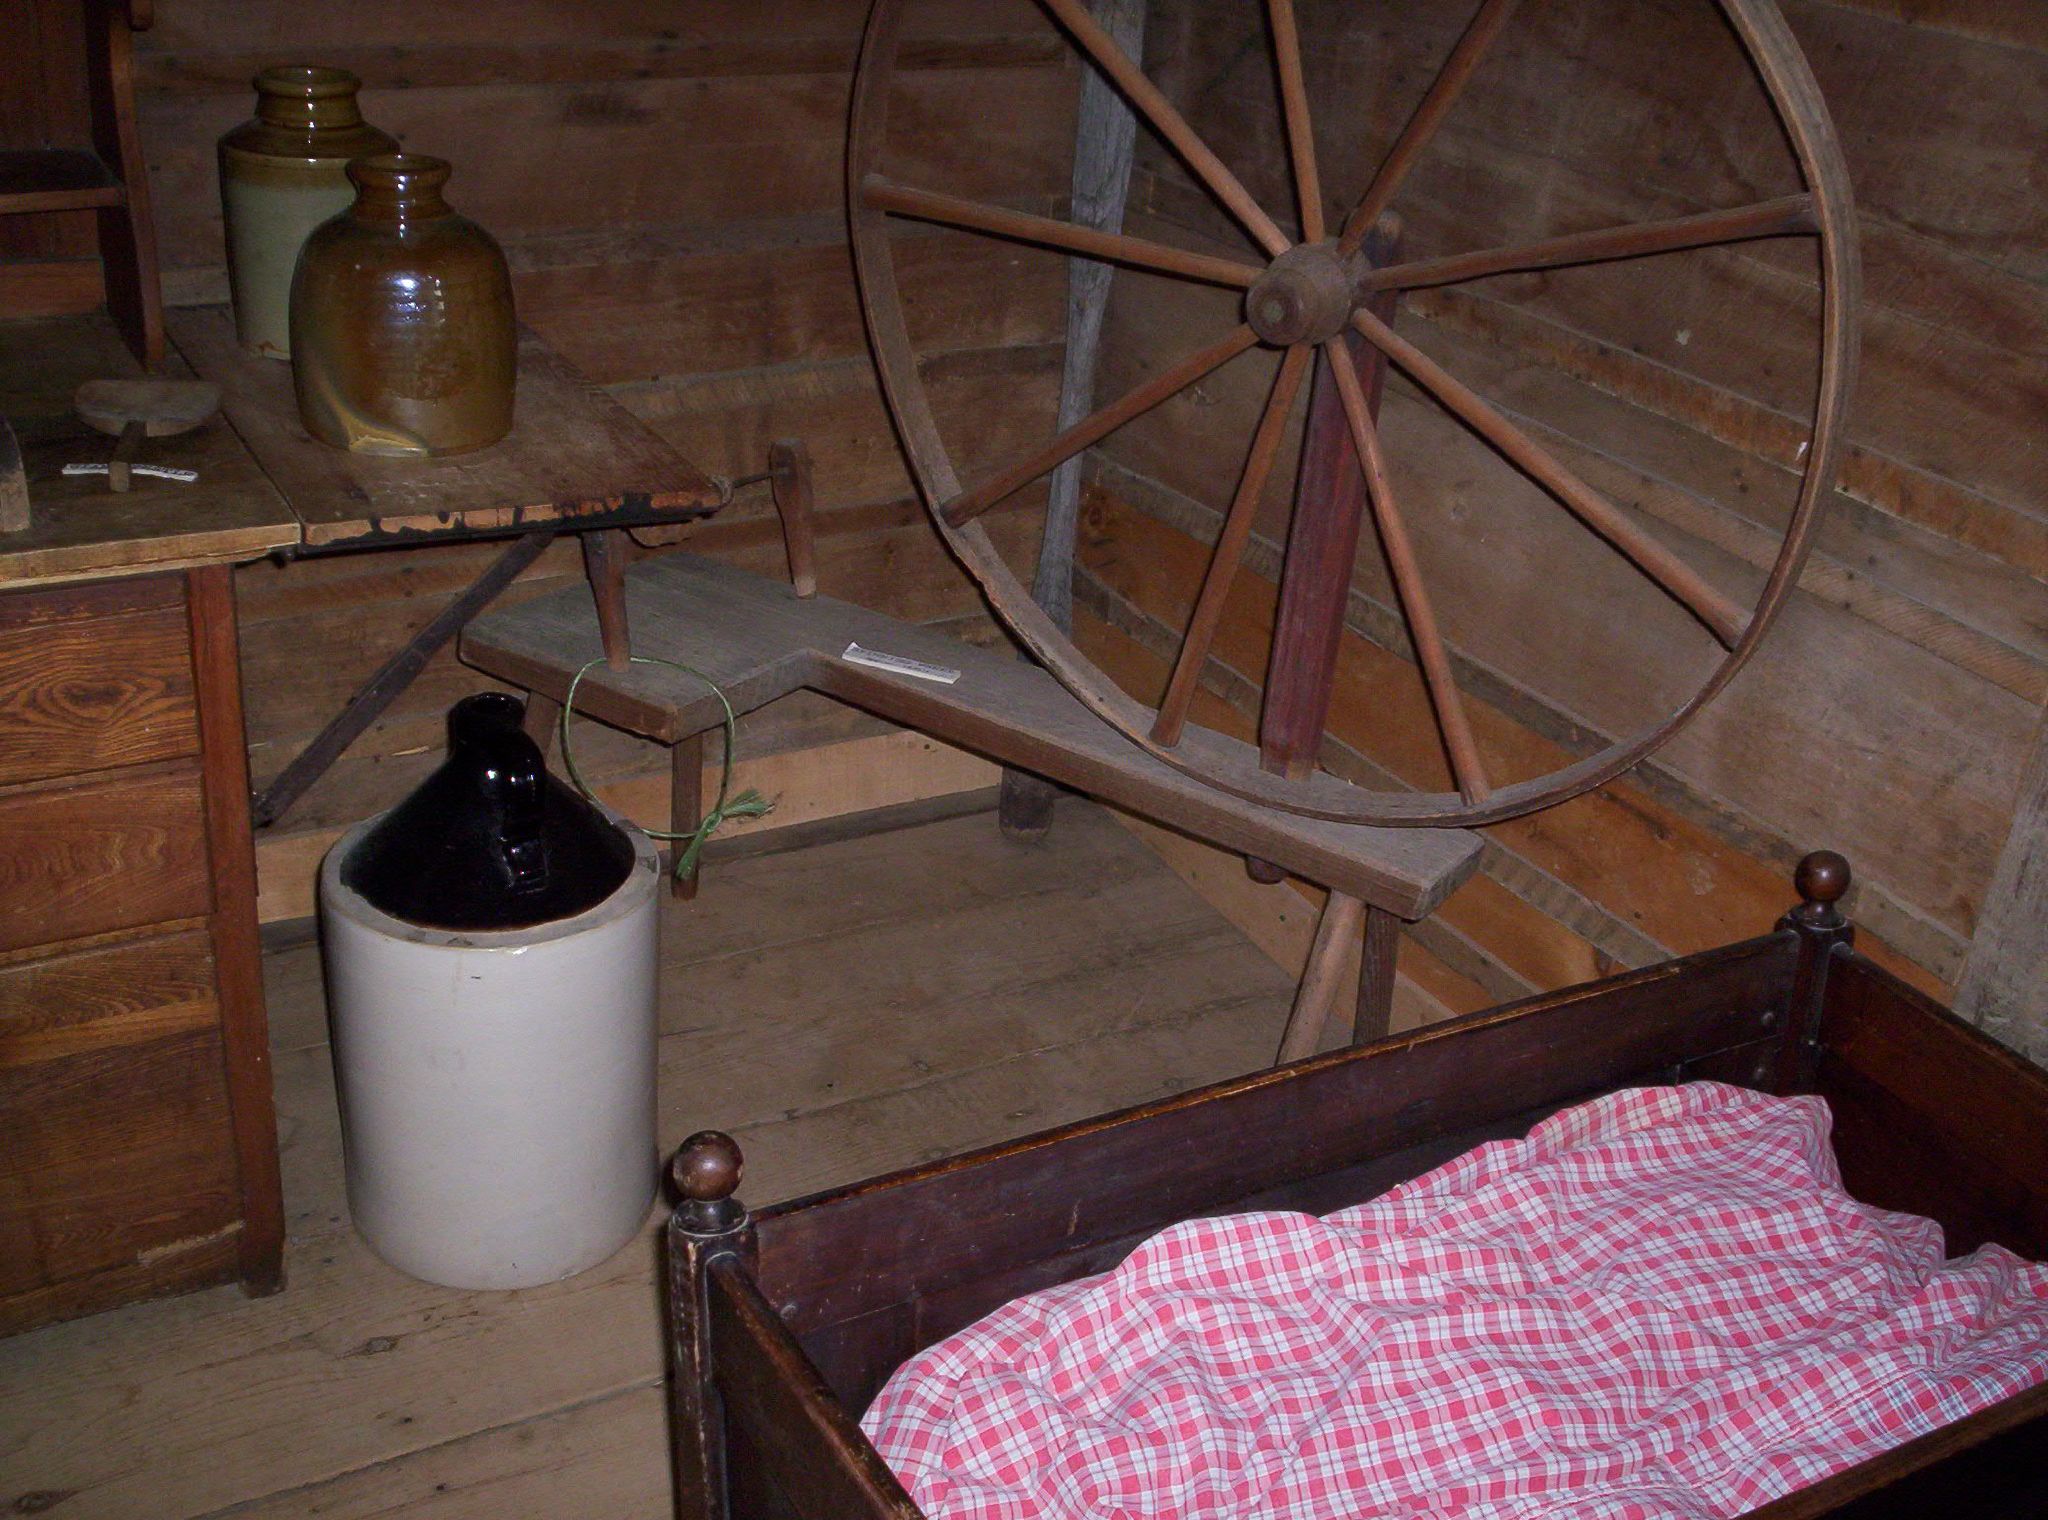 the empty bottle is near a wooden wheel and a bottle in a wagon